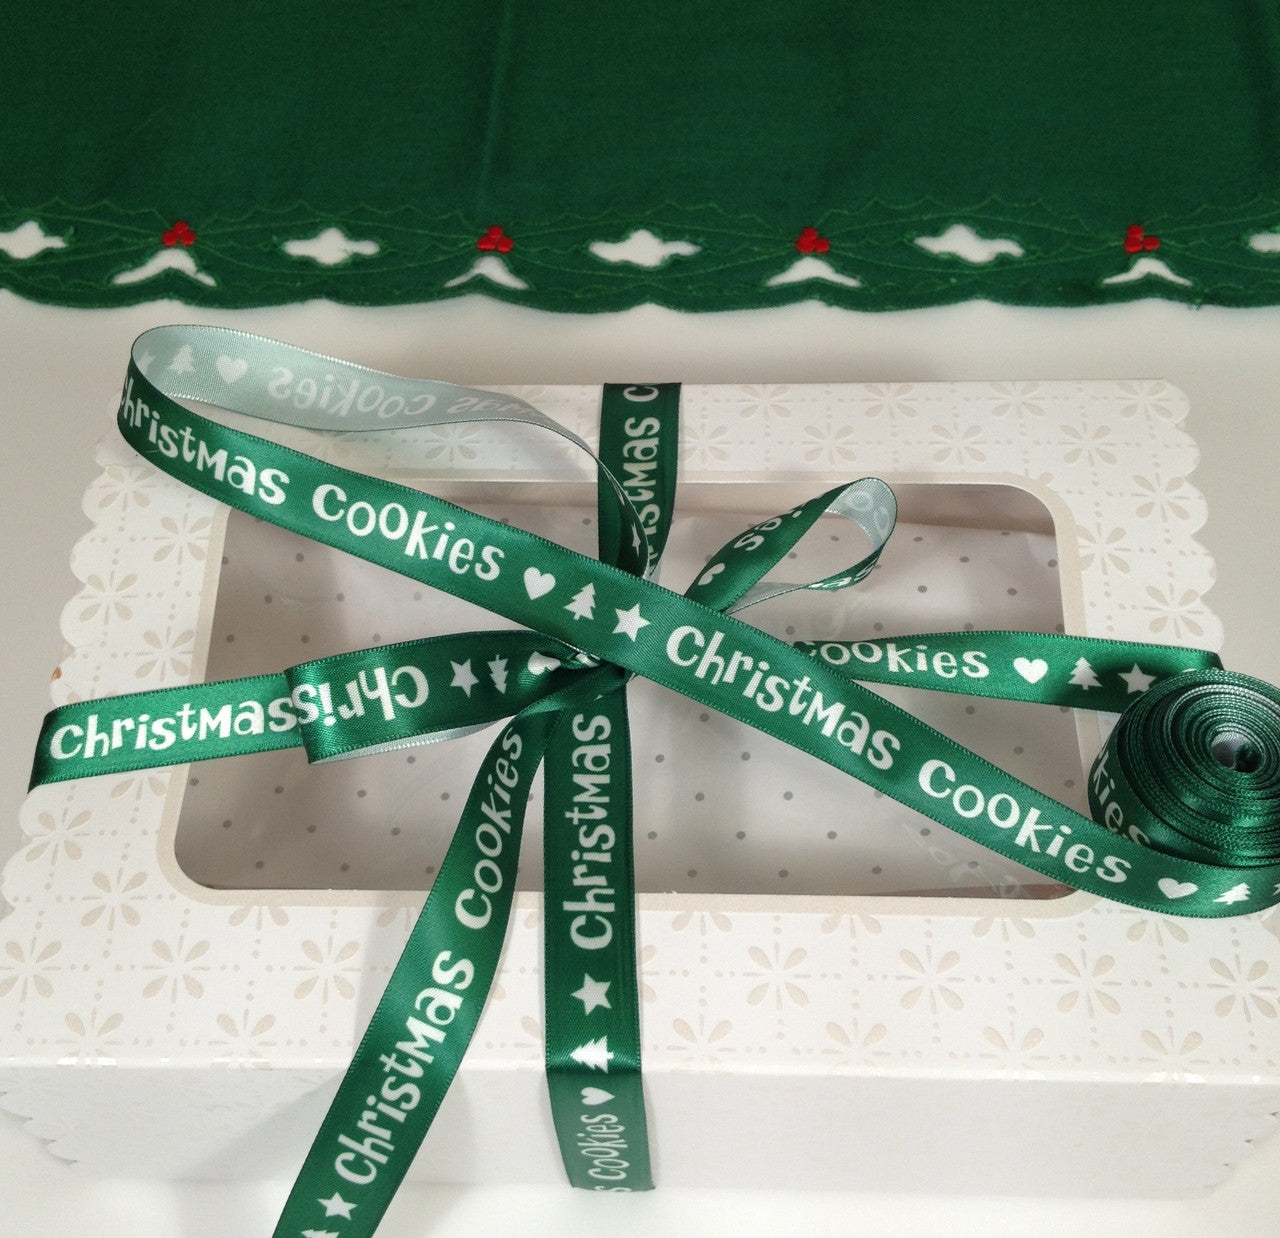 Our Christmas Cookies ribbon in green makes this box of cookies extra special for the Season!